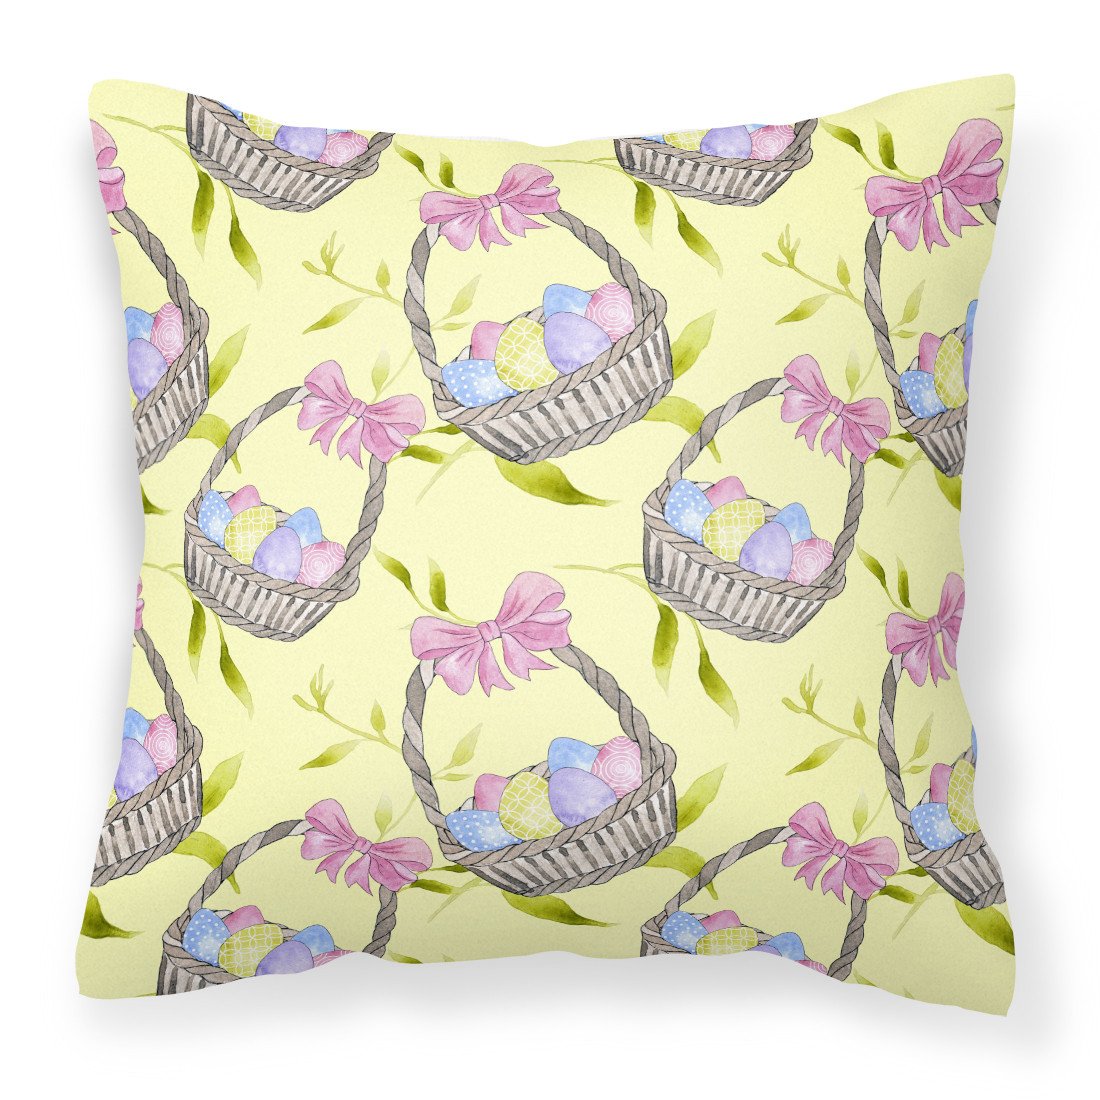 Easter Basket and Eggs Fabric Decorative Pillow BB7490PW1818 by Caroline's Treasures